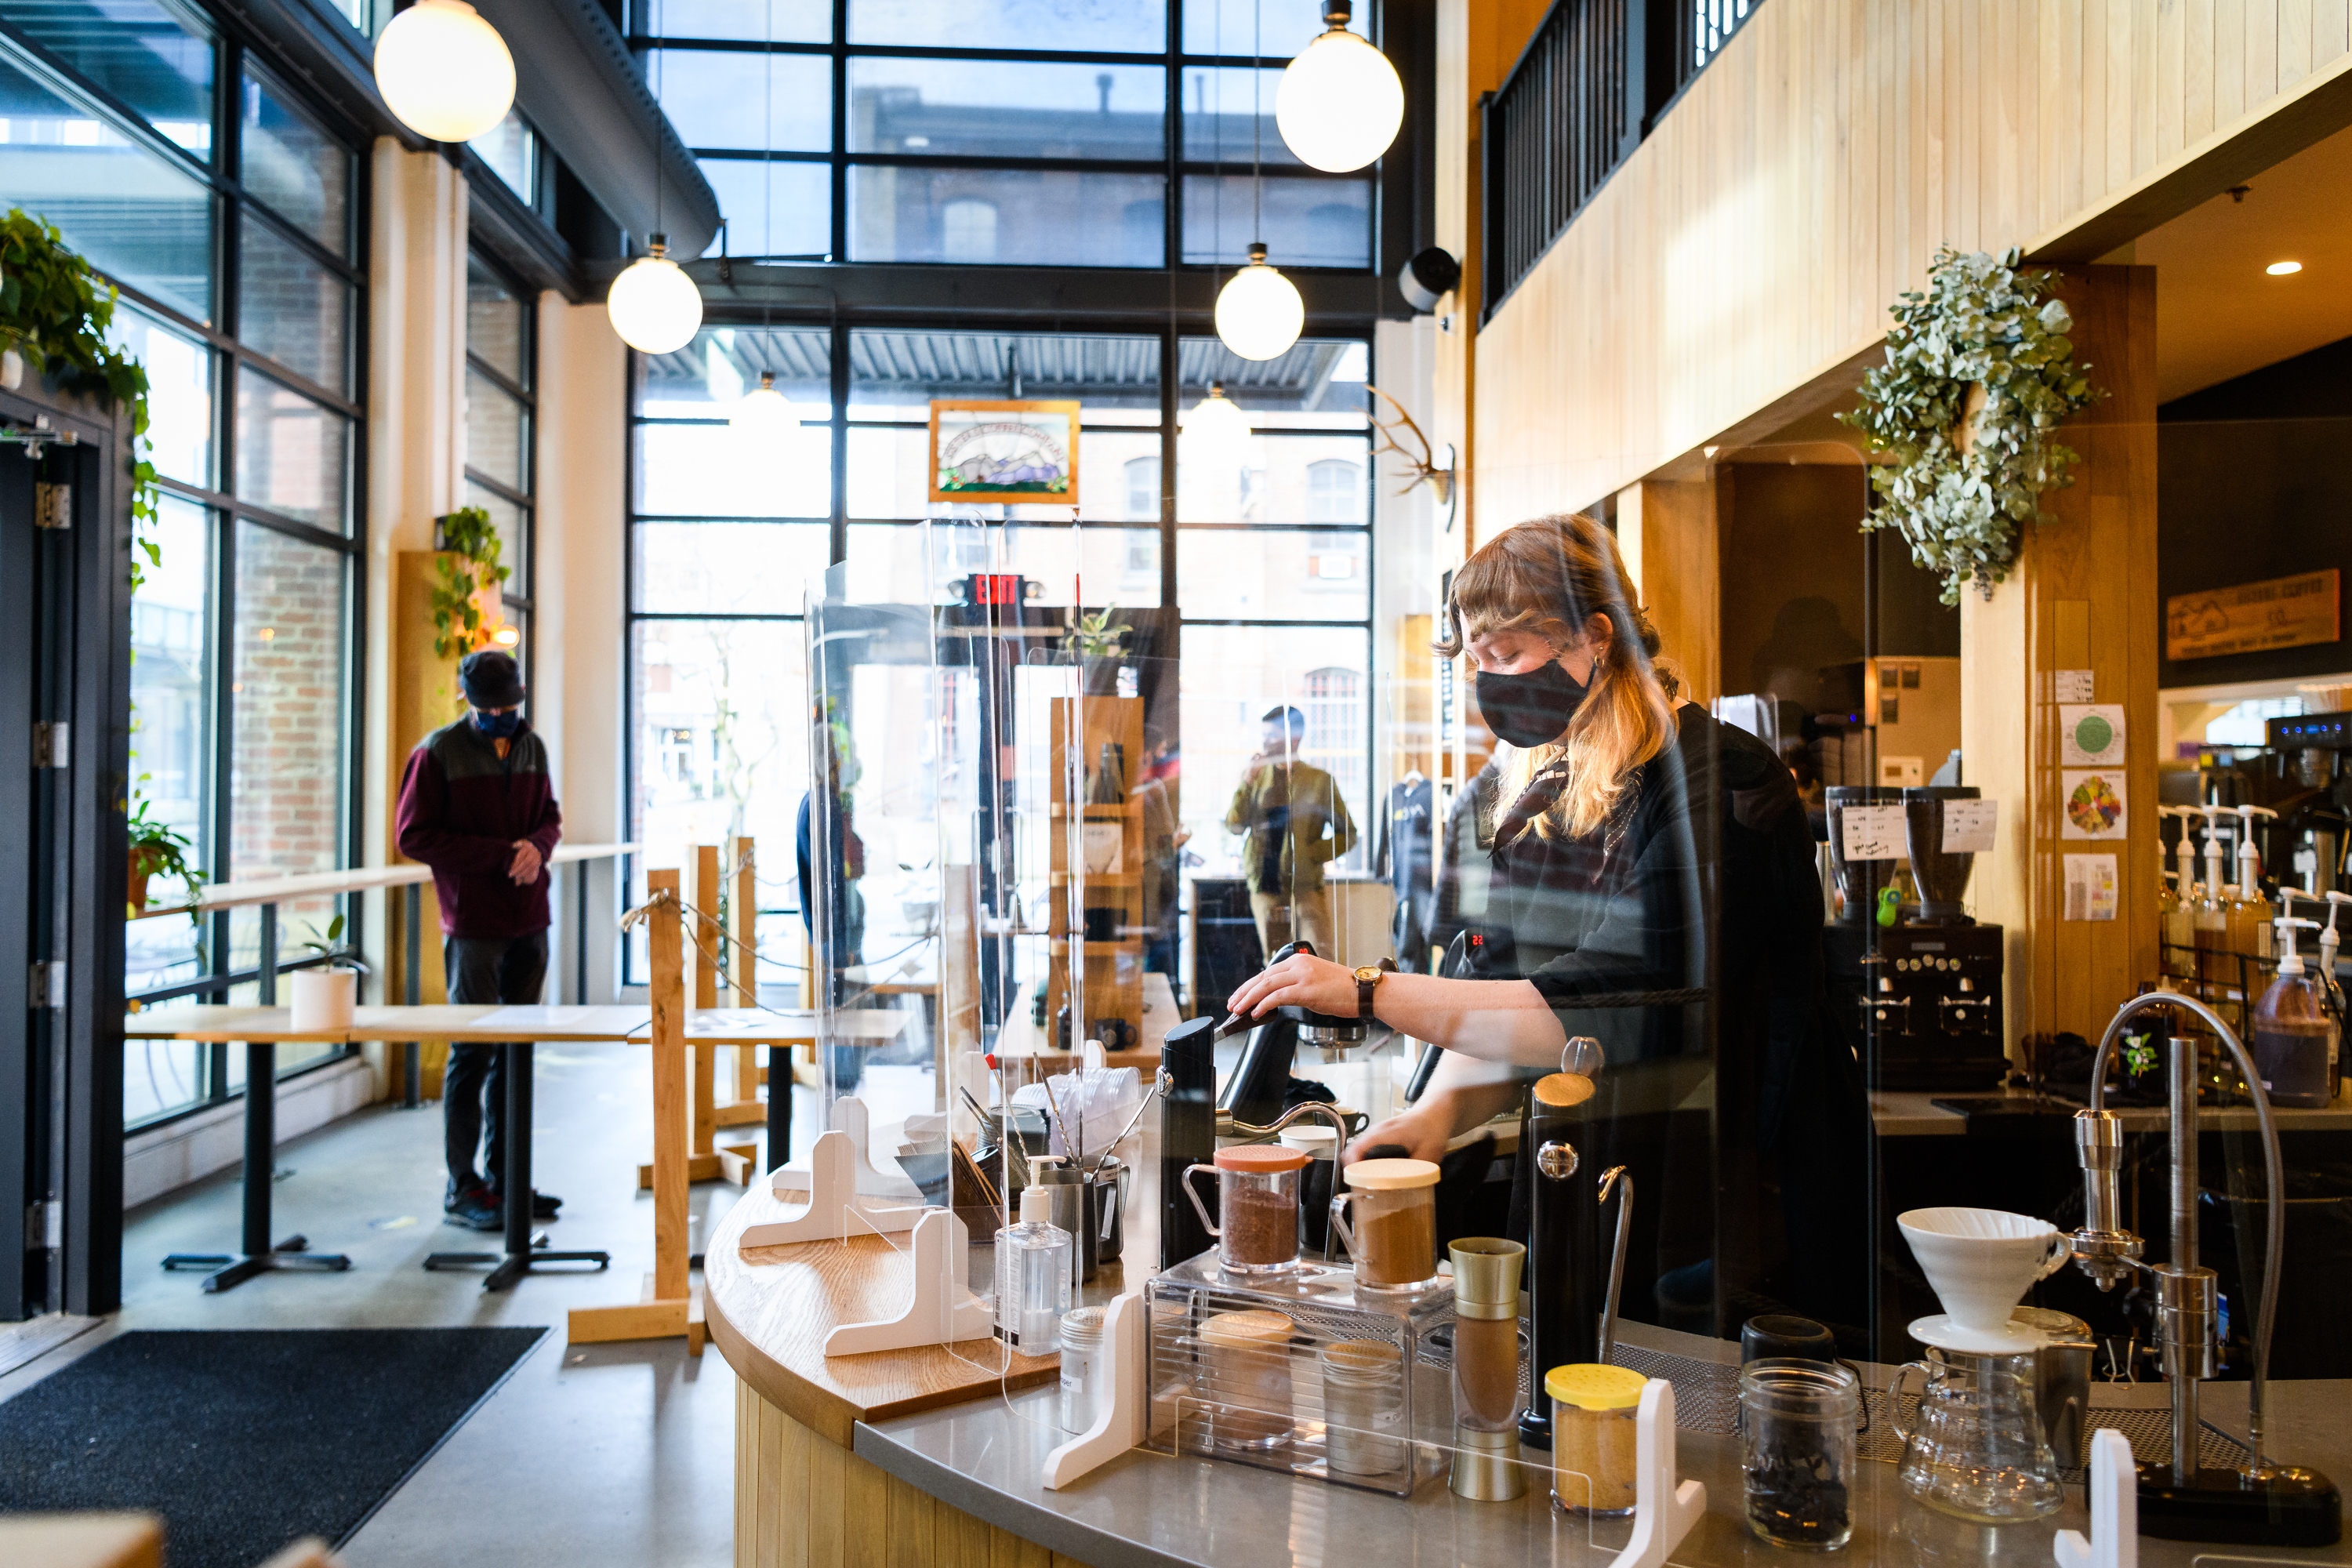 A woman in blonde braids and a black mask makes coffee drinks behind the curved bar at Sisters Coffee, which has high ceilings and globe lights.